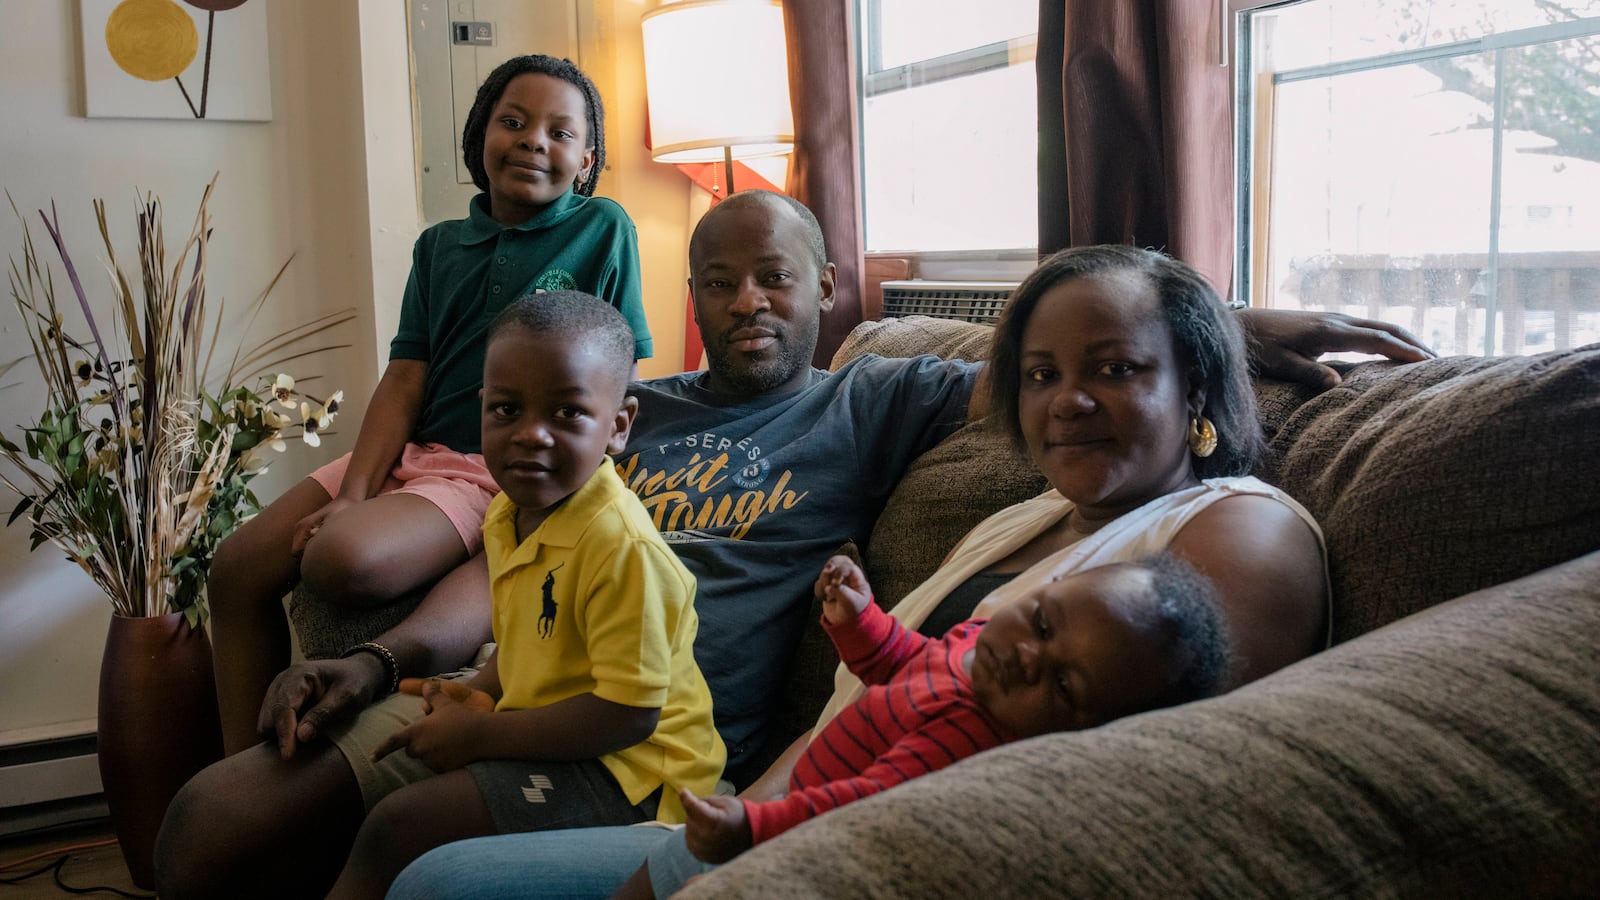 The Dairo family, consisting of parents John and Oyefunmilola and their young children, Abigail, Michael and infant Elijah, sit together on their living room couch next to a window.